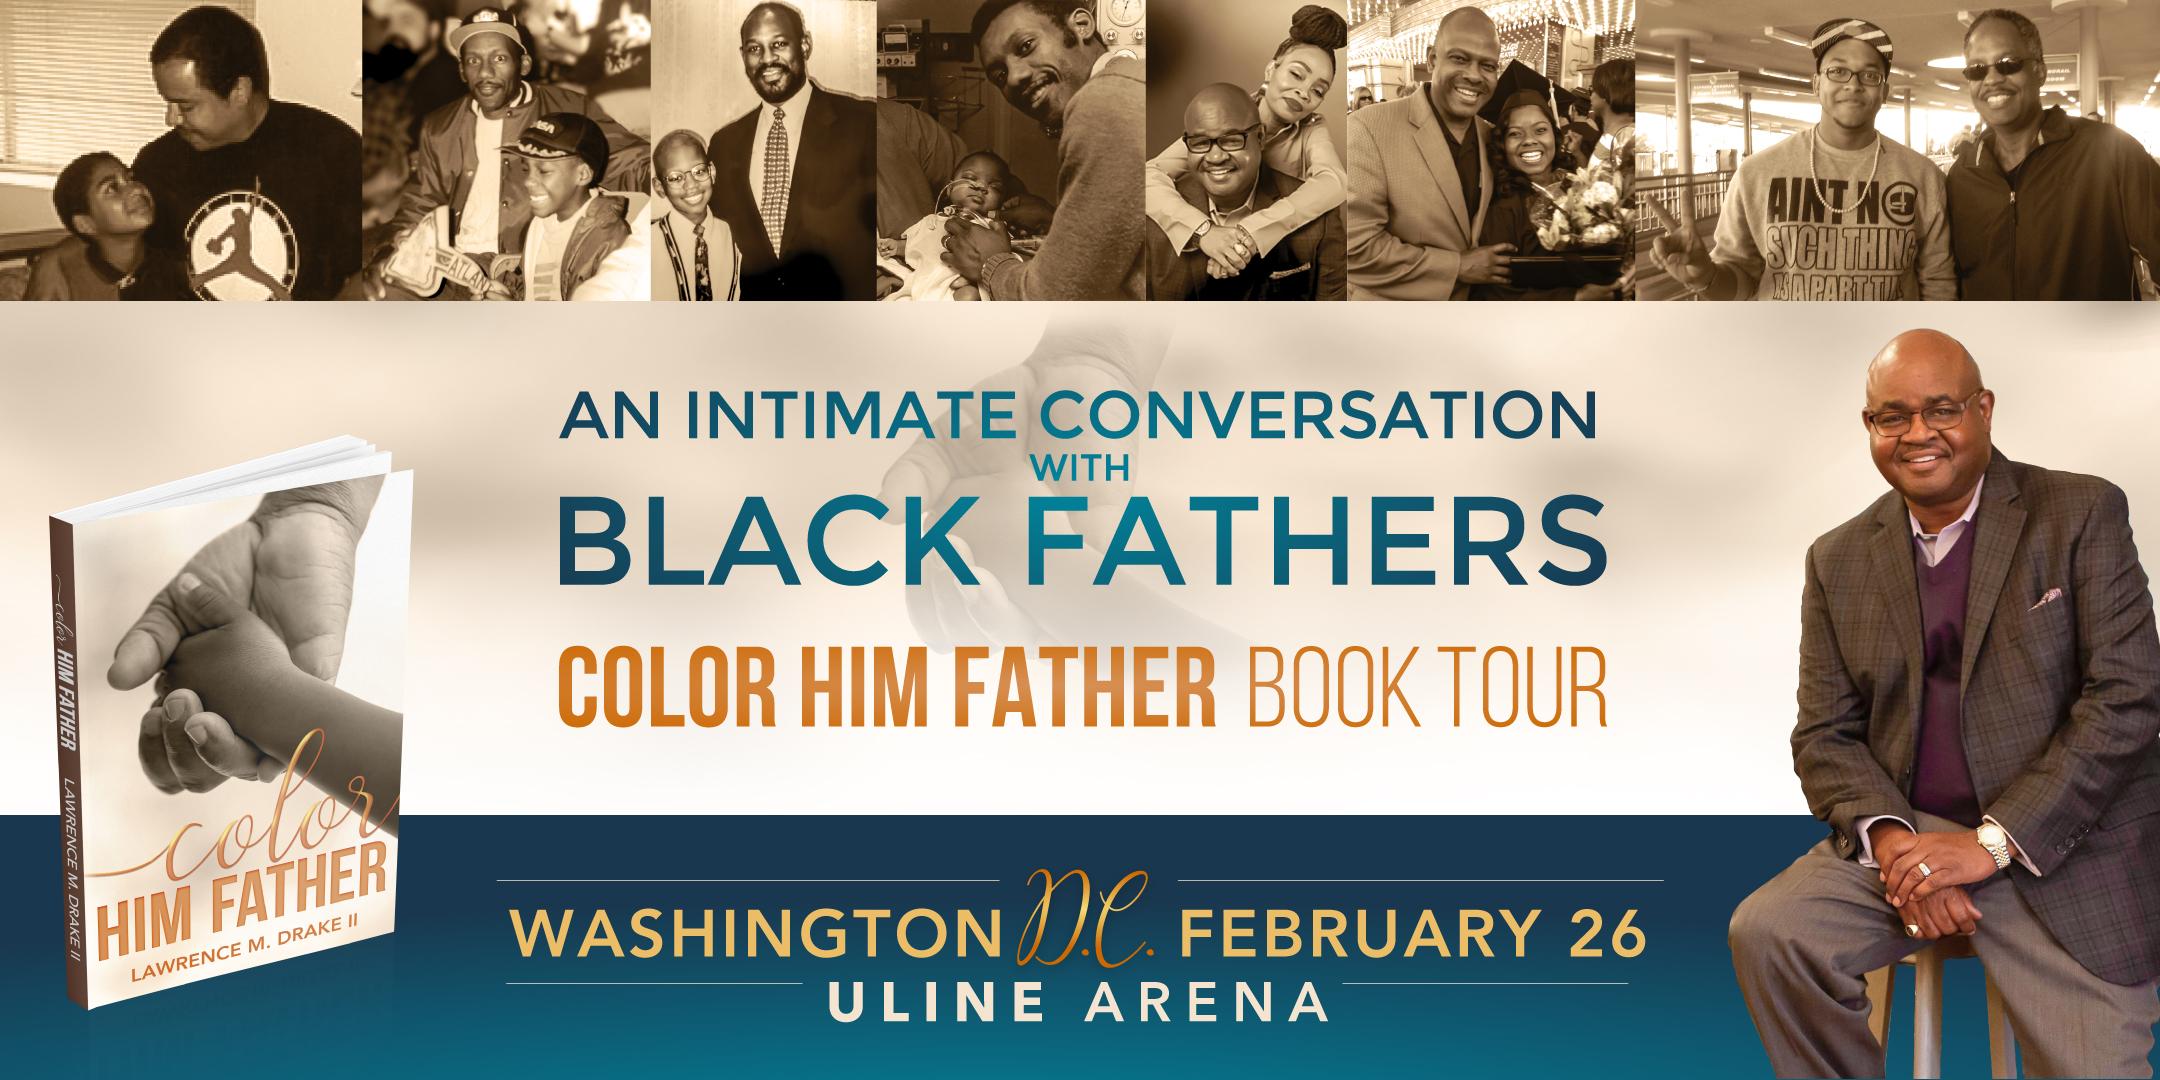 An Intimate Conversation with Black Fathers